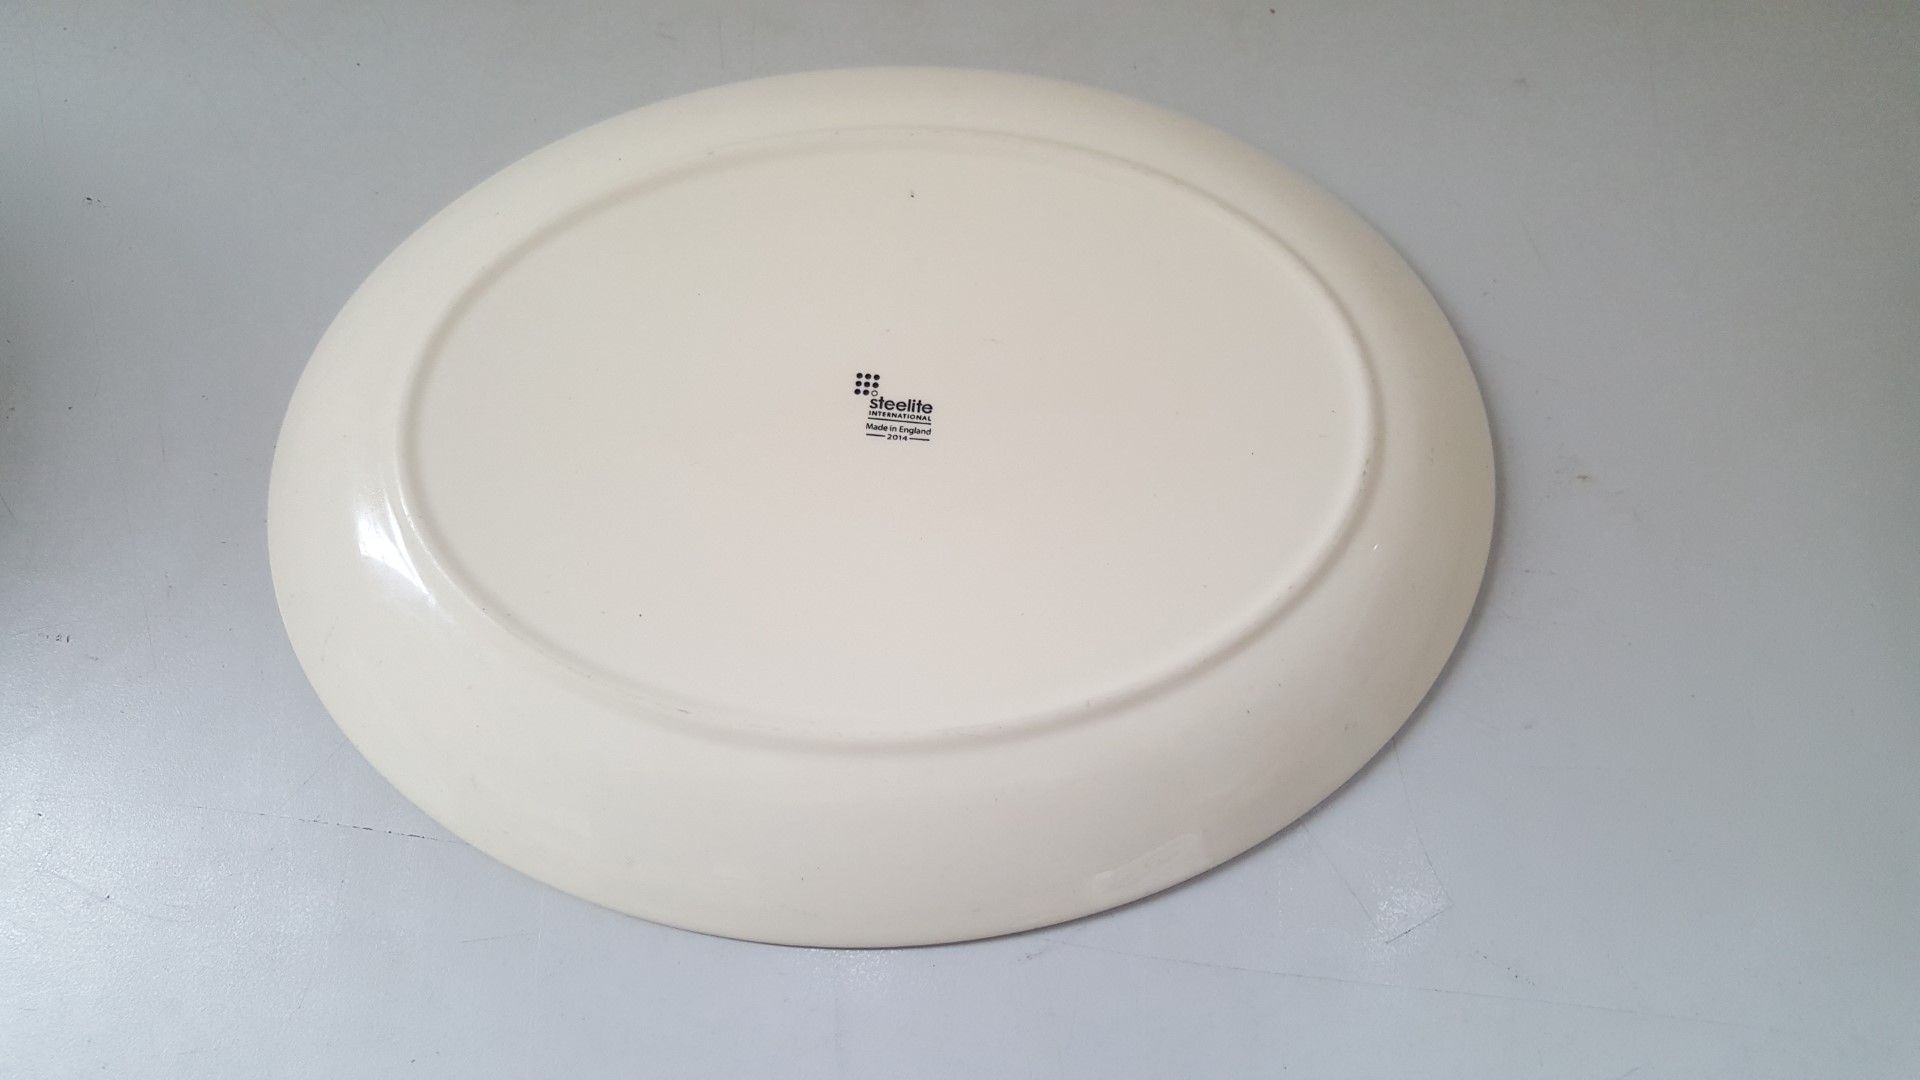 13 x Steelite Oval Serving Plates Cream With Pattered Egde L30/W23.5CM - Ref CQ271 - Image 2 of 5